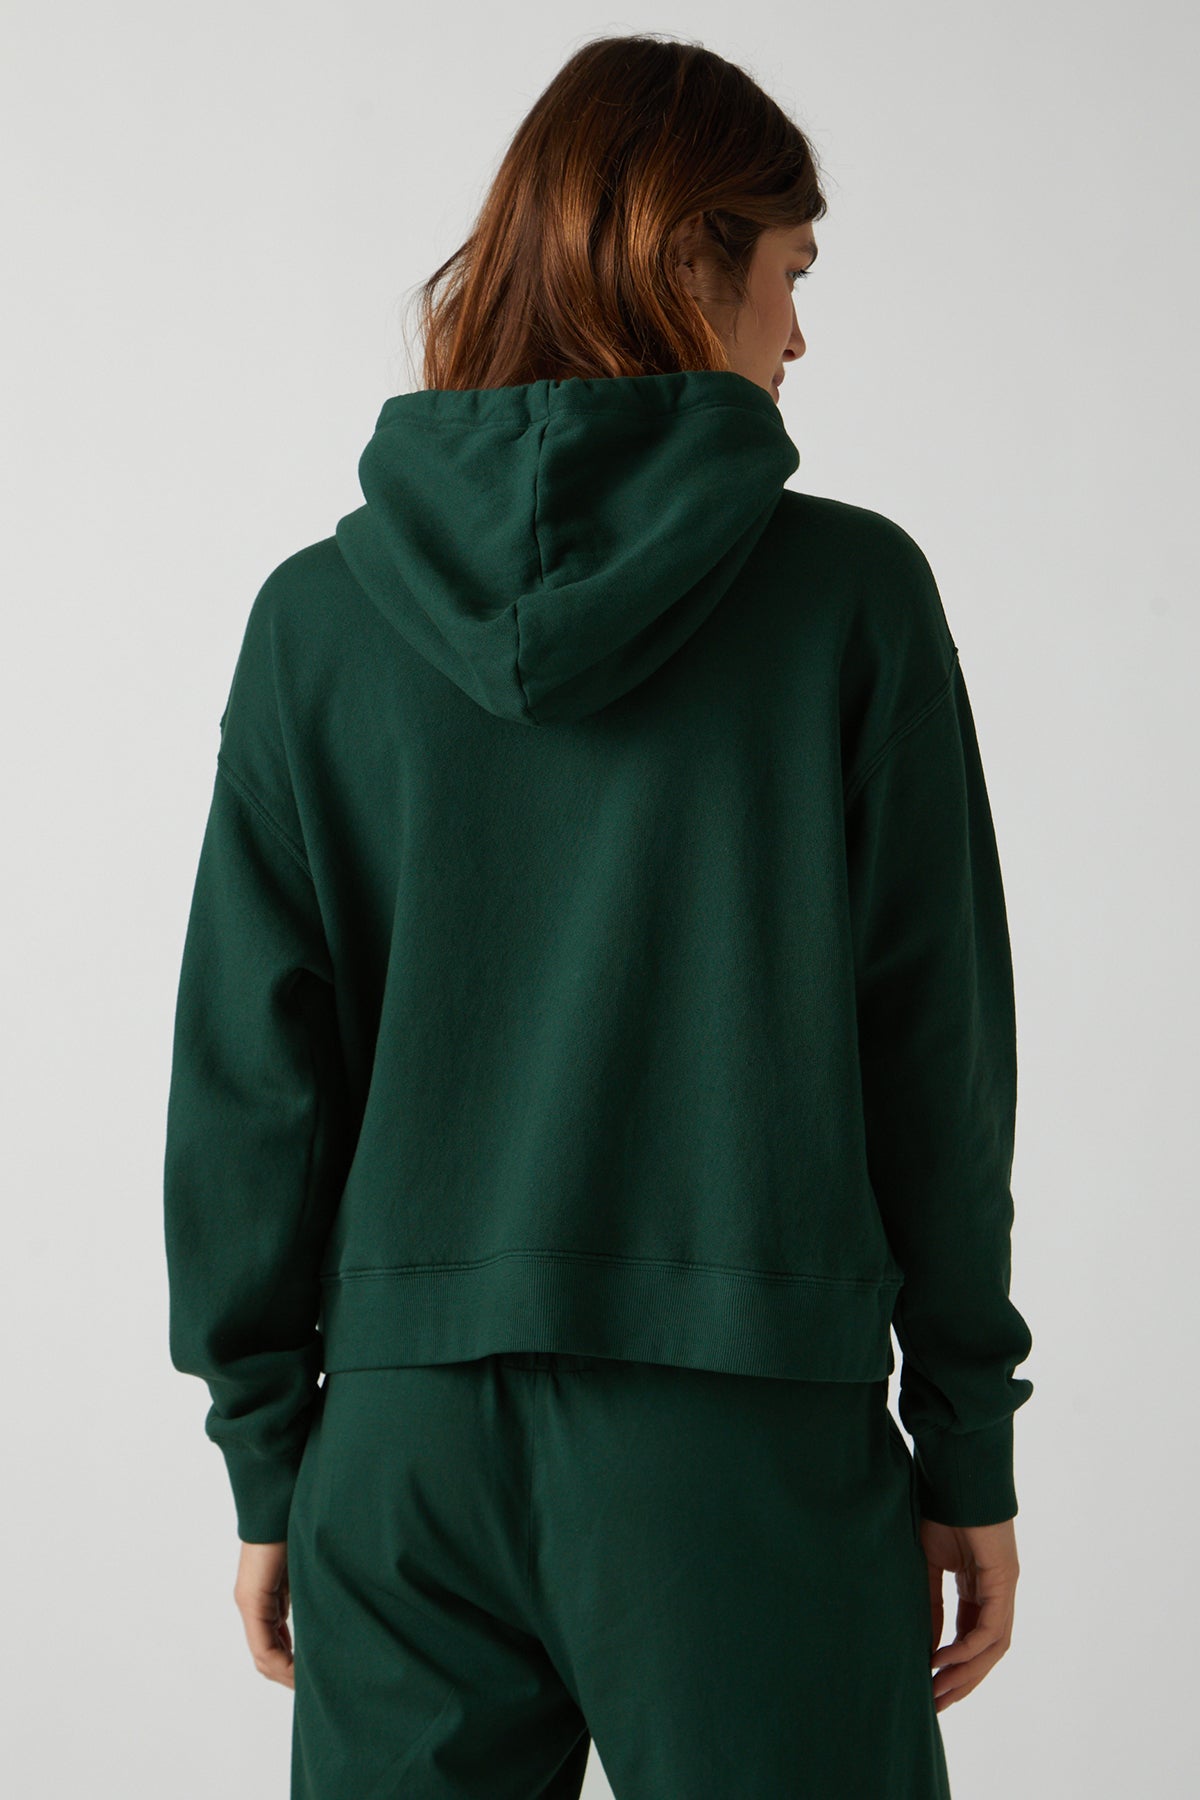 Ojai Hoodie in forest green back-25483563106497